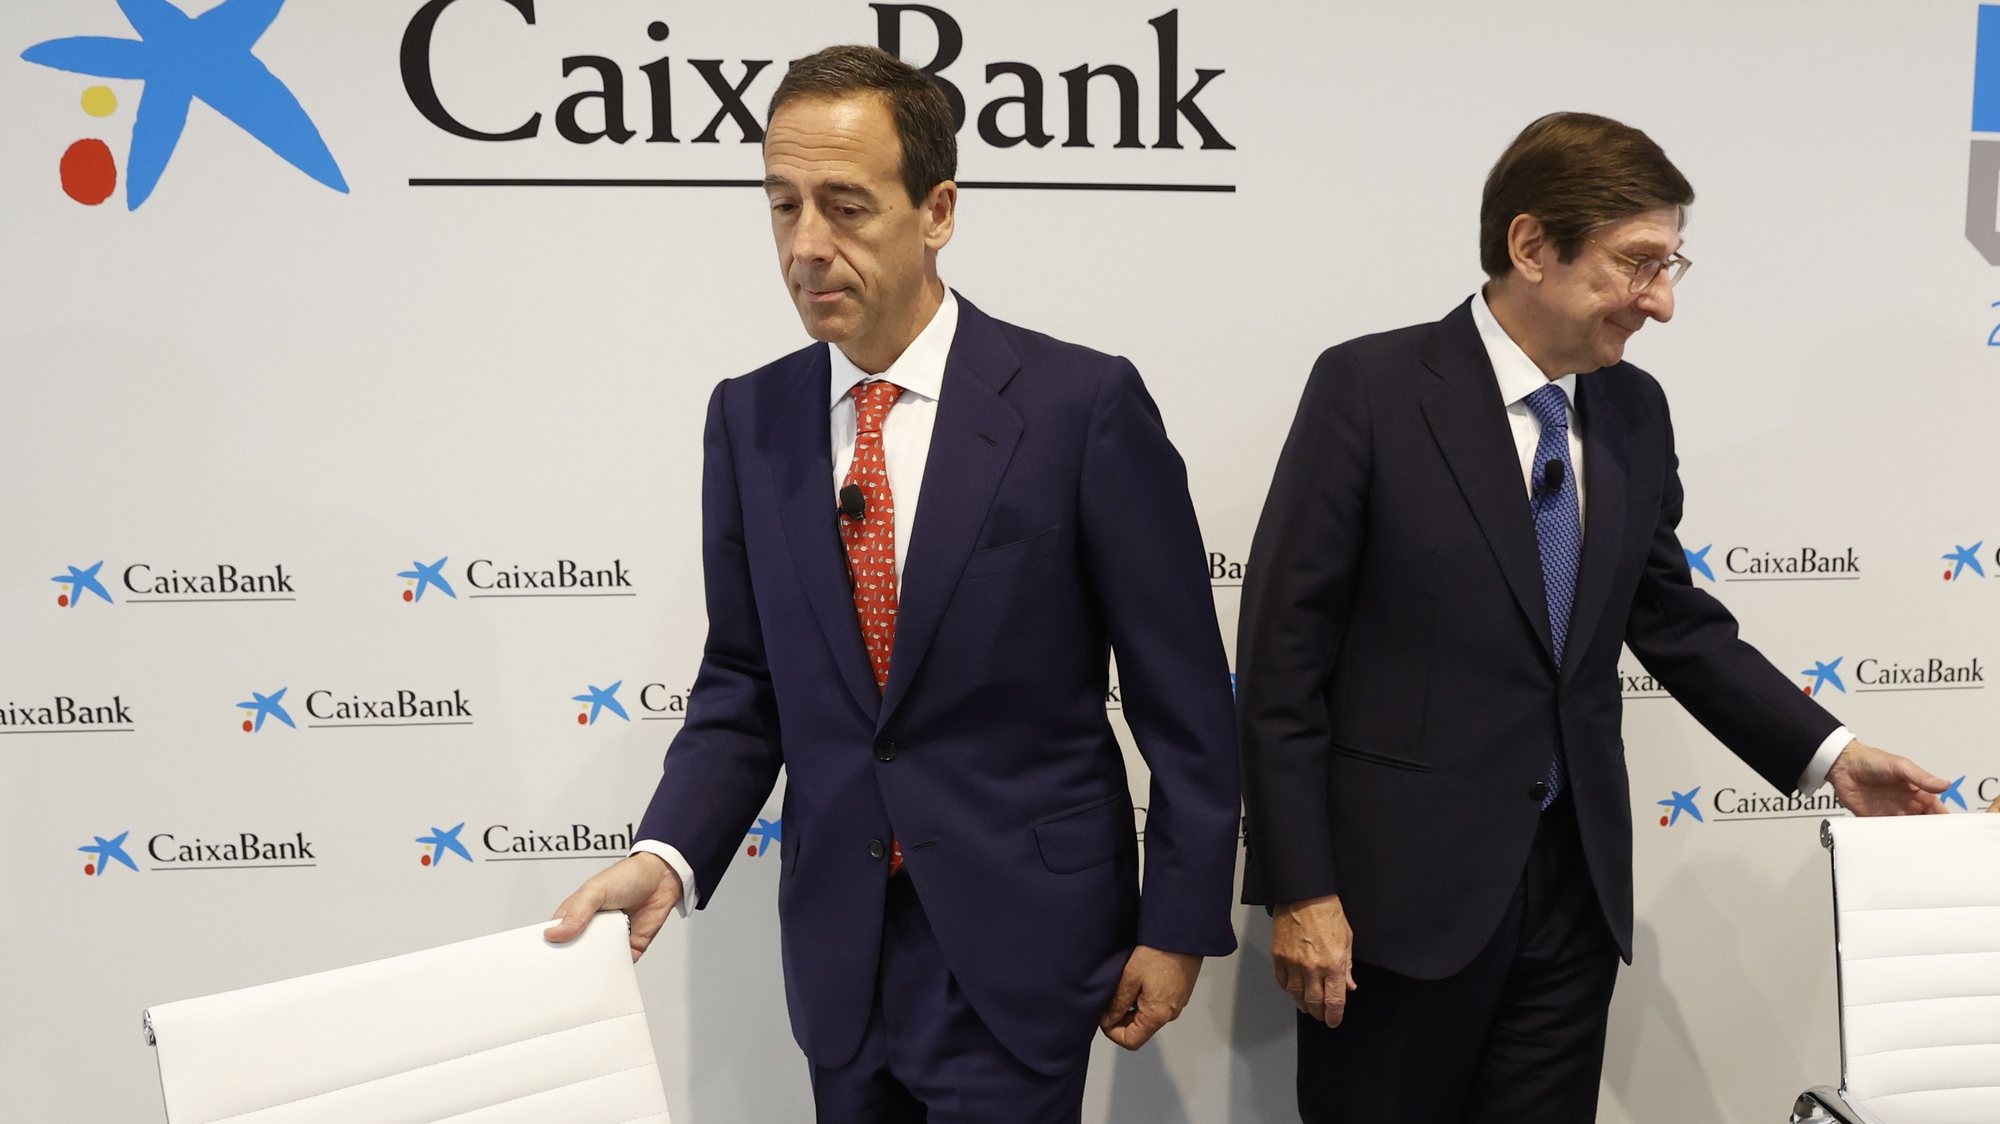 epa09952427 CaixaBank president Jose Ignacio Goirigolzarri (R) and CaixaBank&#039;s CEO Gonzalo Gortazar (L) attend a press conference for the presentation of the bank&#039;s strategic plan for 2022-2024, in Madrid, Spain, 17 May 2022. CaixaBank will become Spain&#039;s biggest bank after the merger with Bankia and La Caixa, which is foreseen, over the course of the plan, to have a profitability of 12 percent and a target of generating capital of approximately nine billion euro.  EPA/JUAN CARLOS HIDALGO